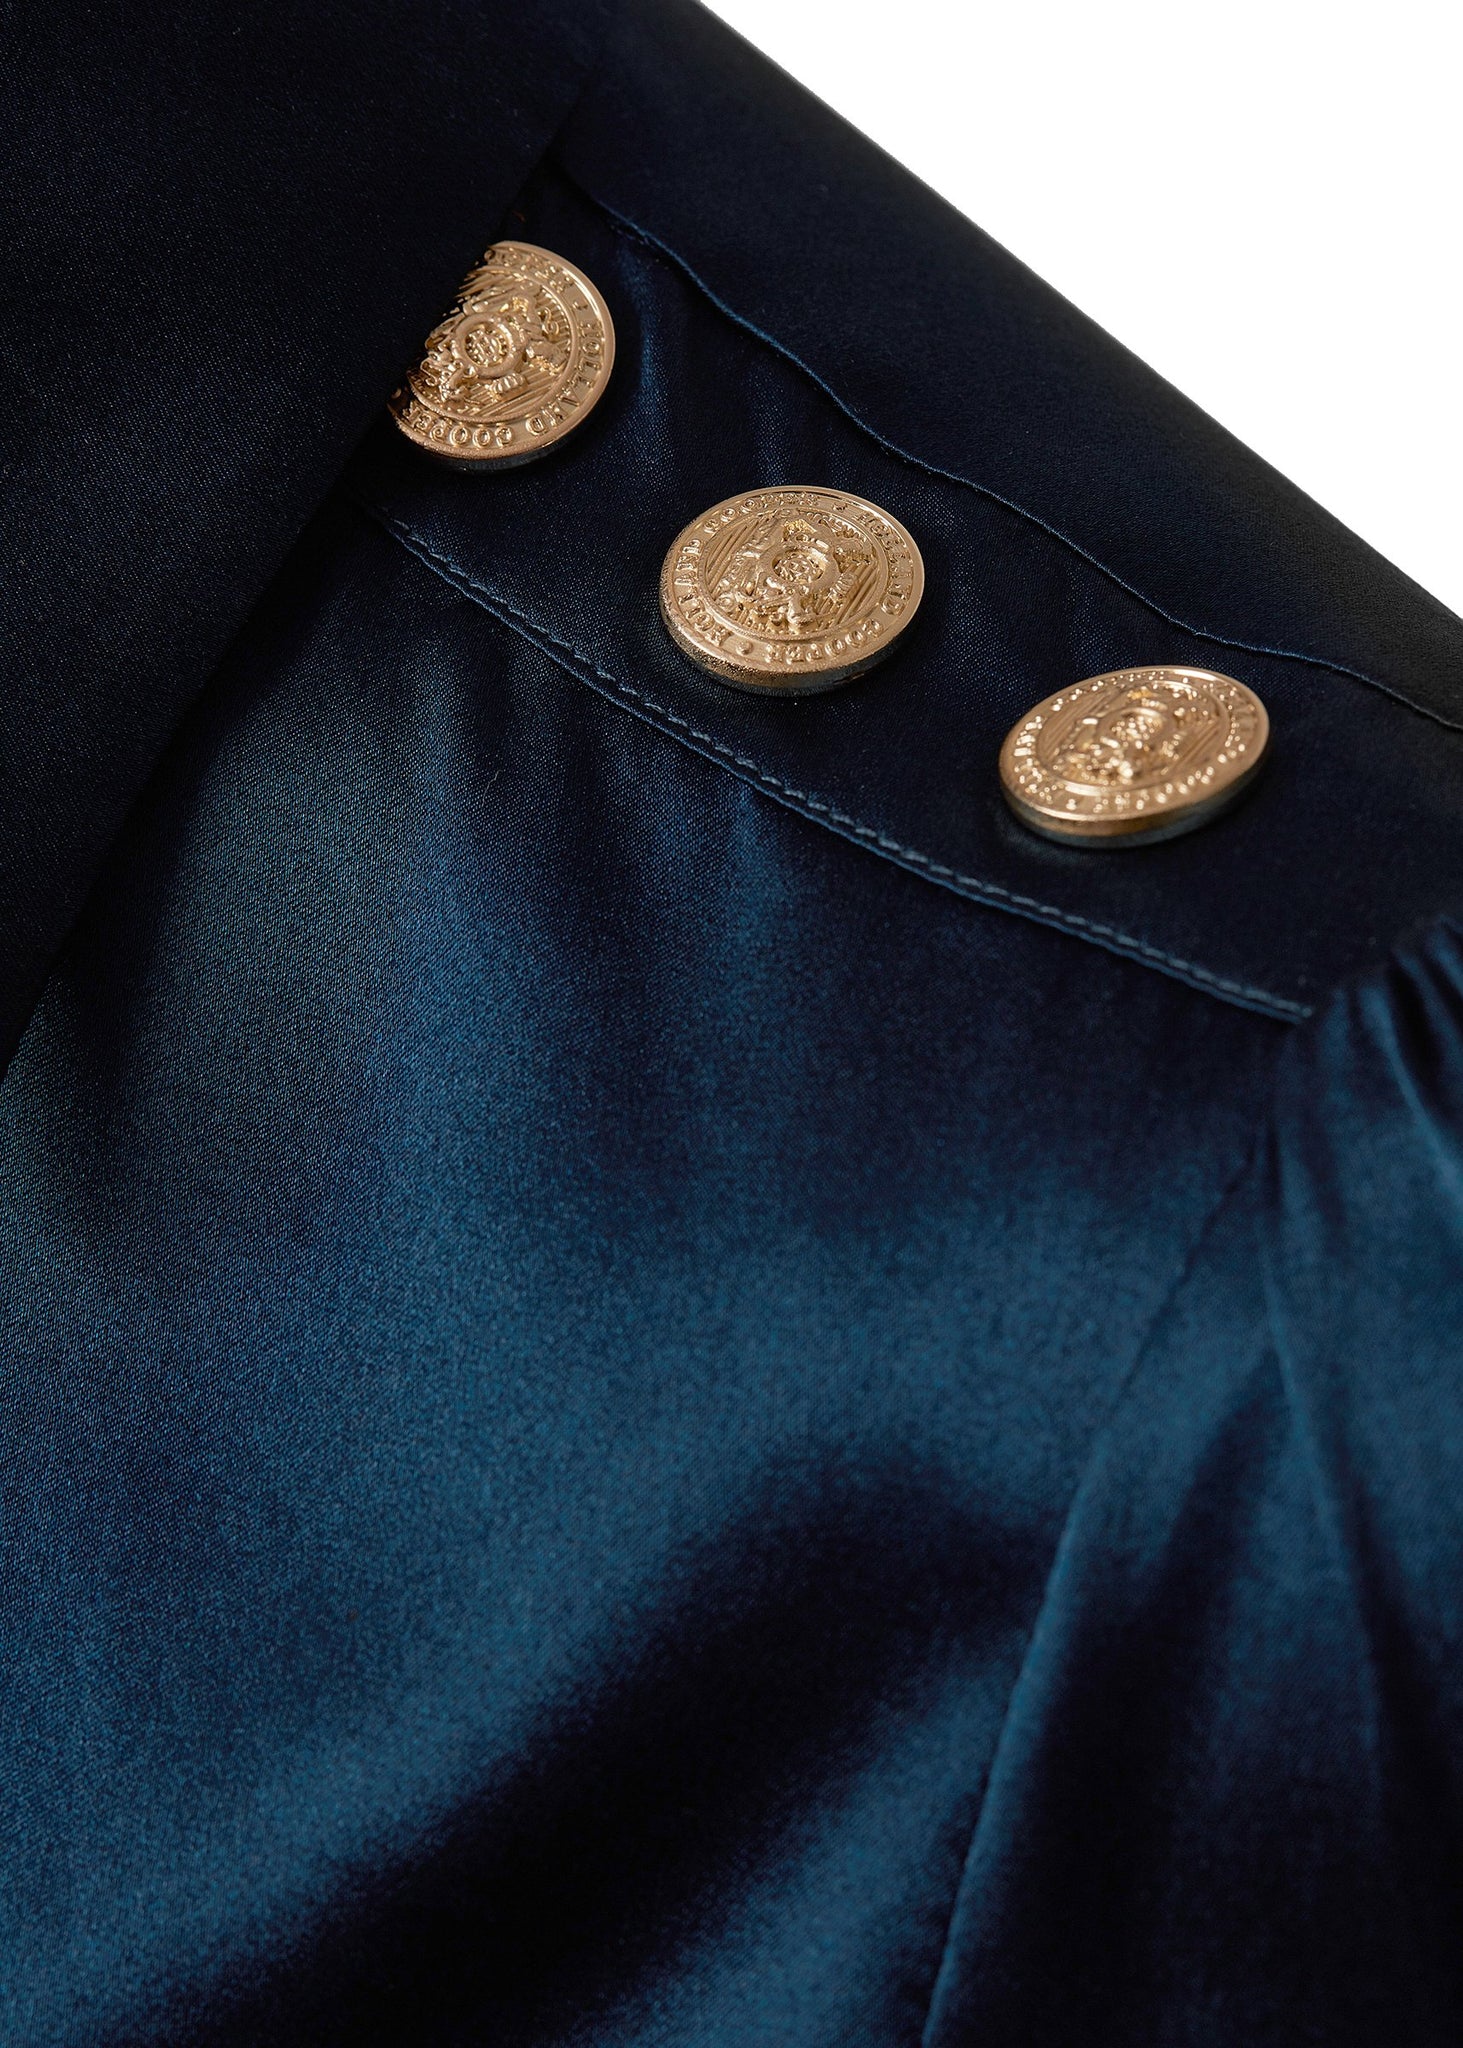 gold button shoulder detail of womens long sleeve blue silk v neck blouse with gold buttons